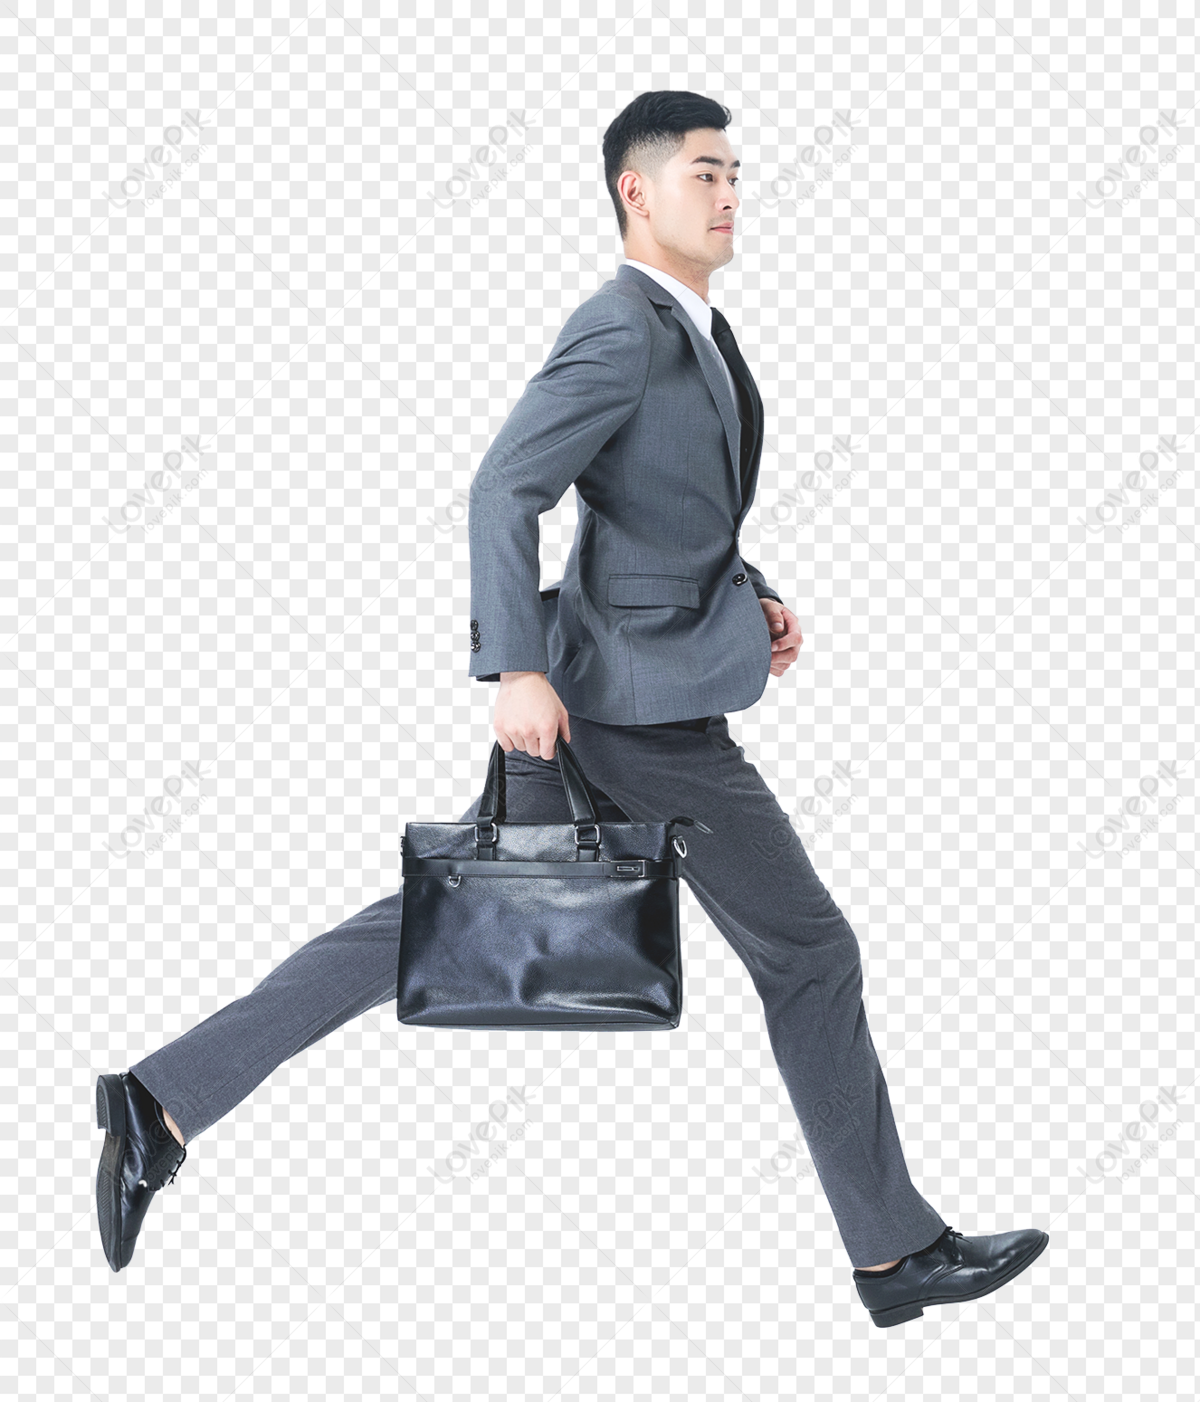 Commercial Male Jumping Exaggeration Free PNG And Clipart Image For ...